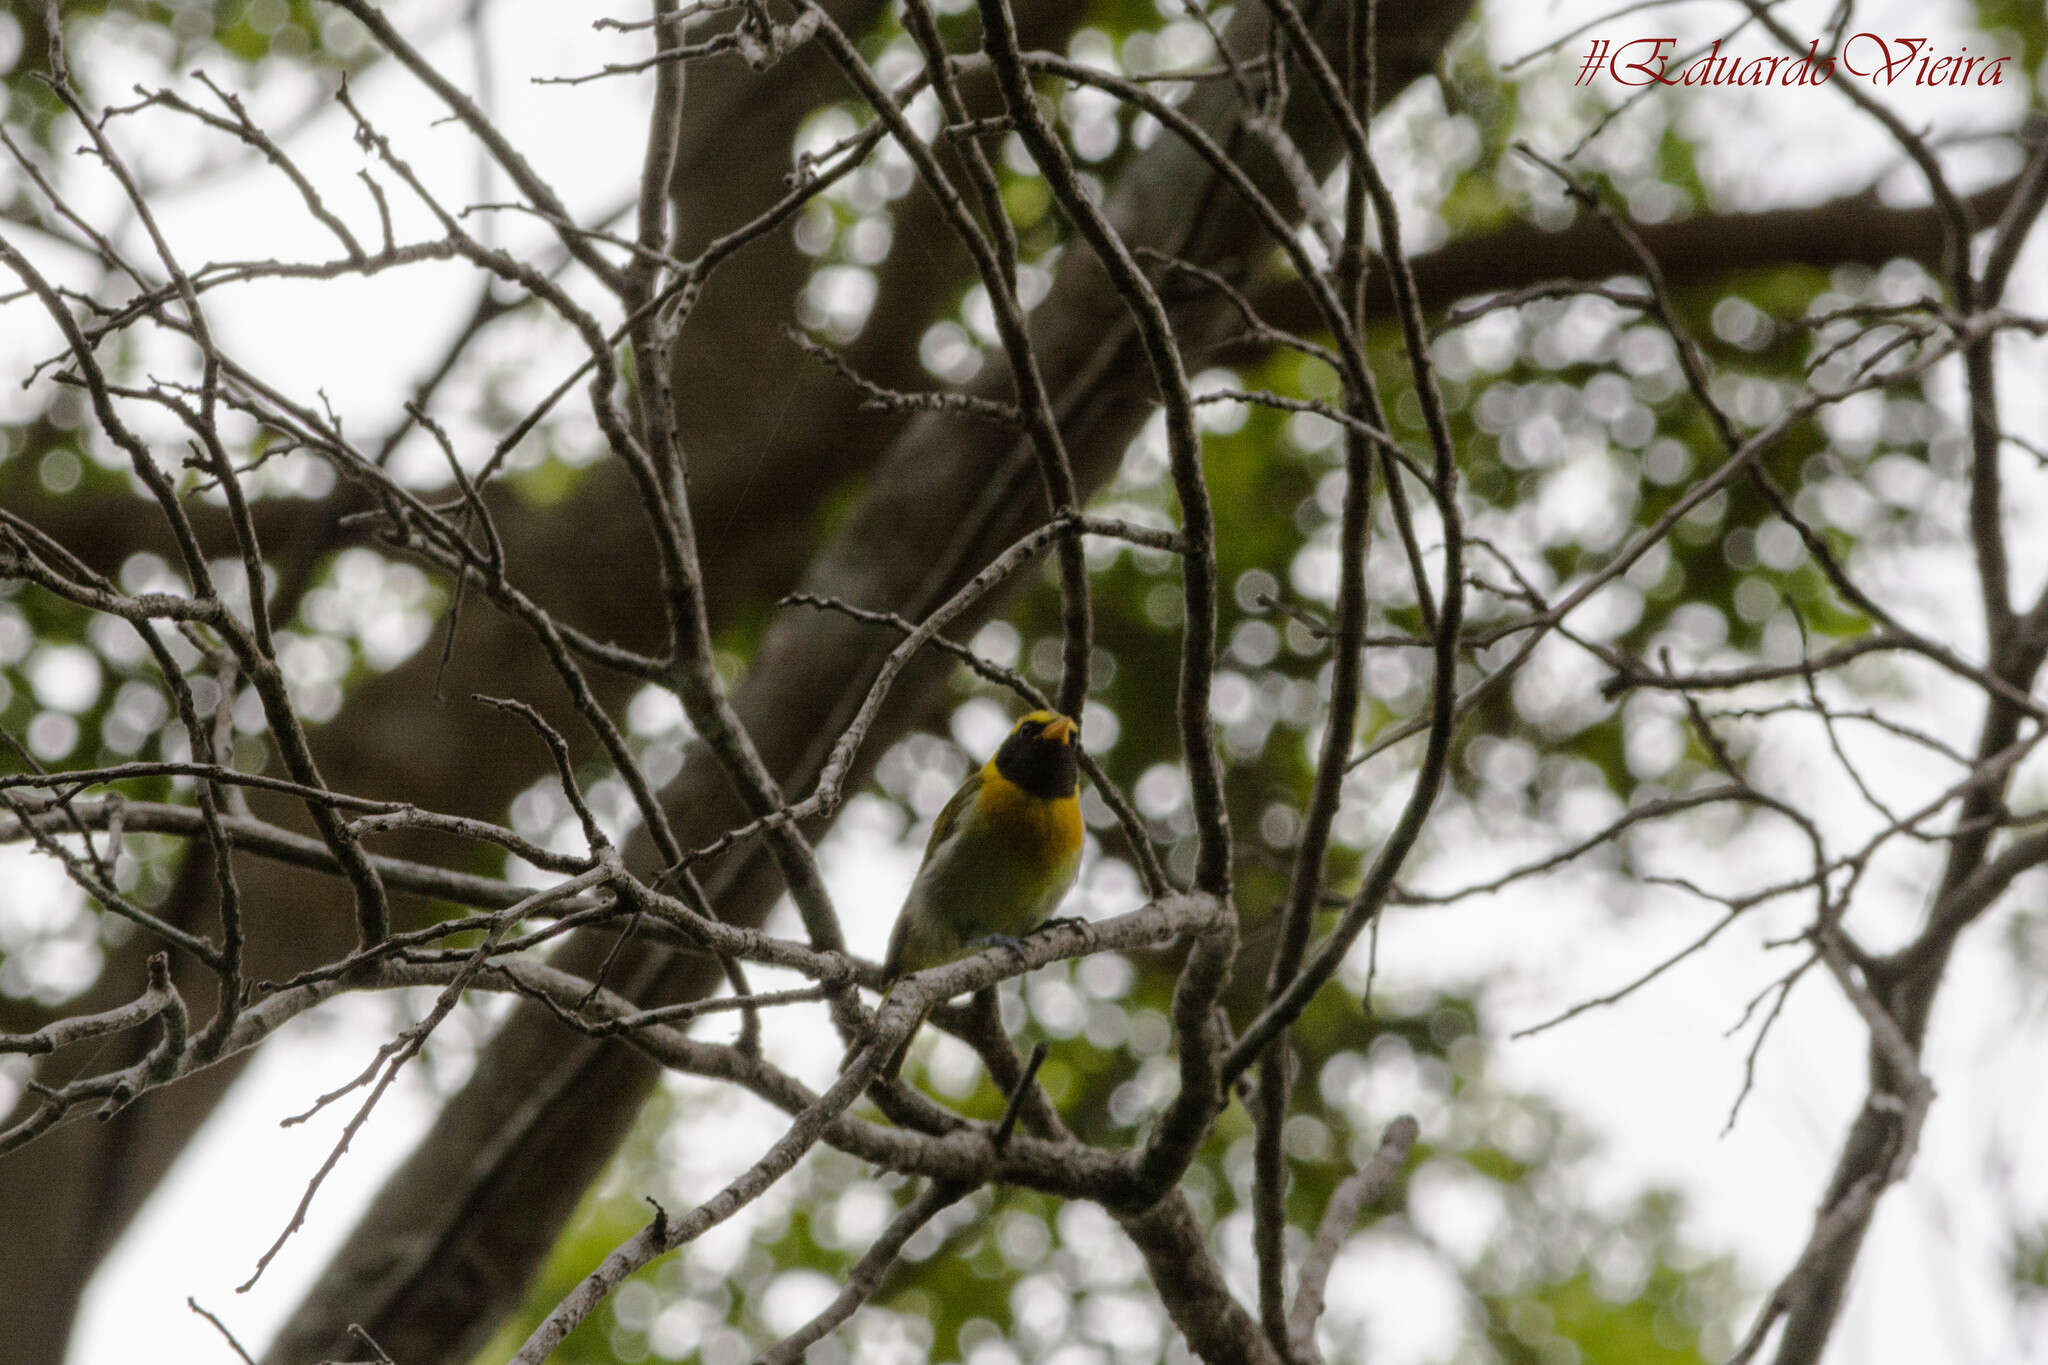 Image of Guira Tanager